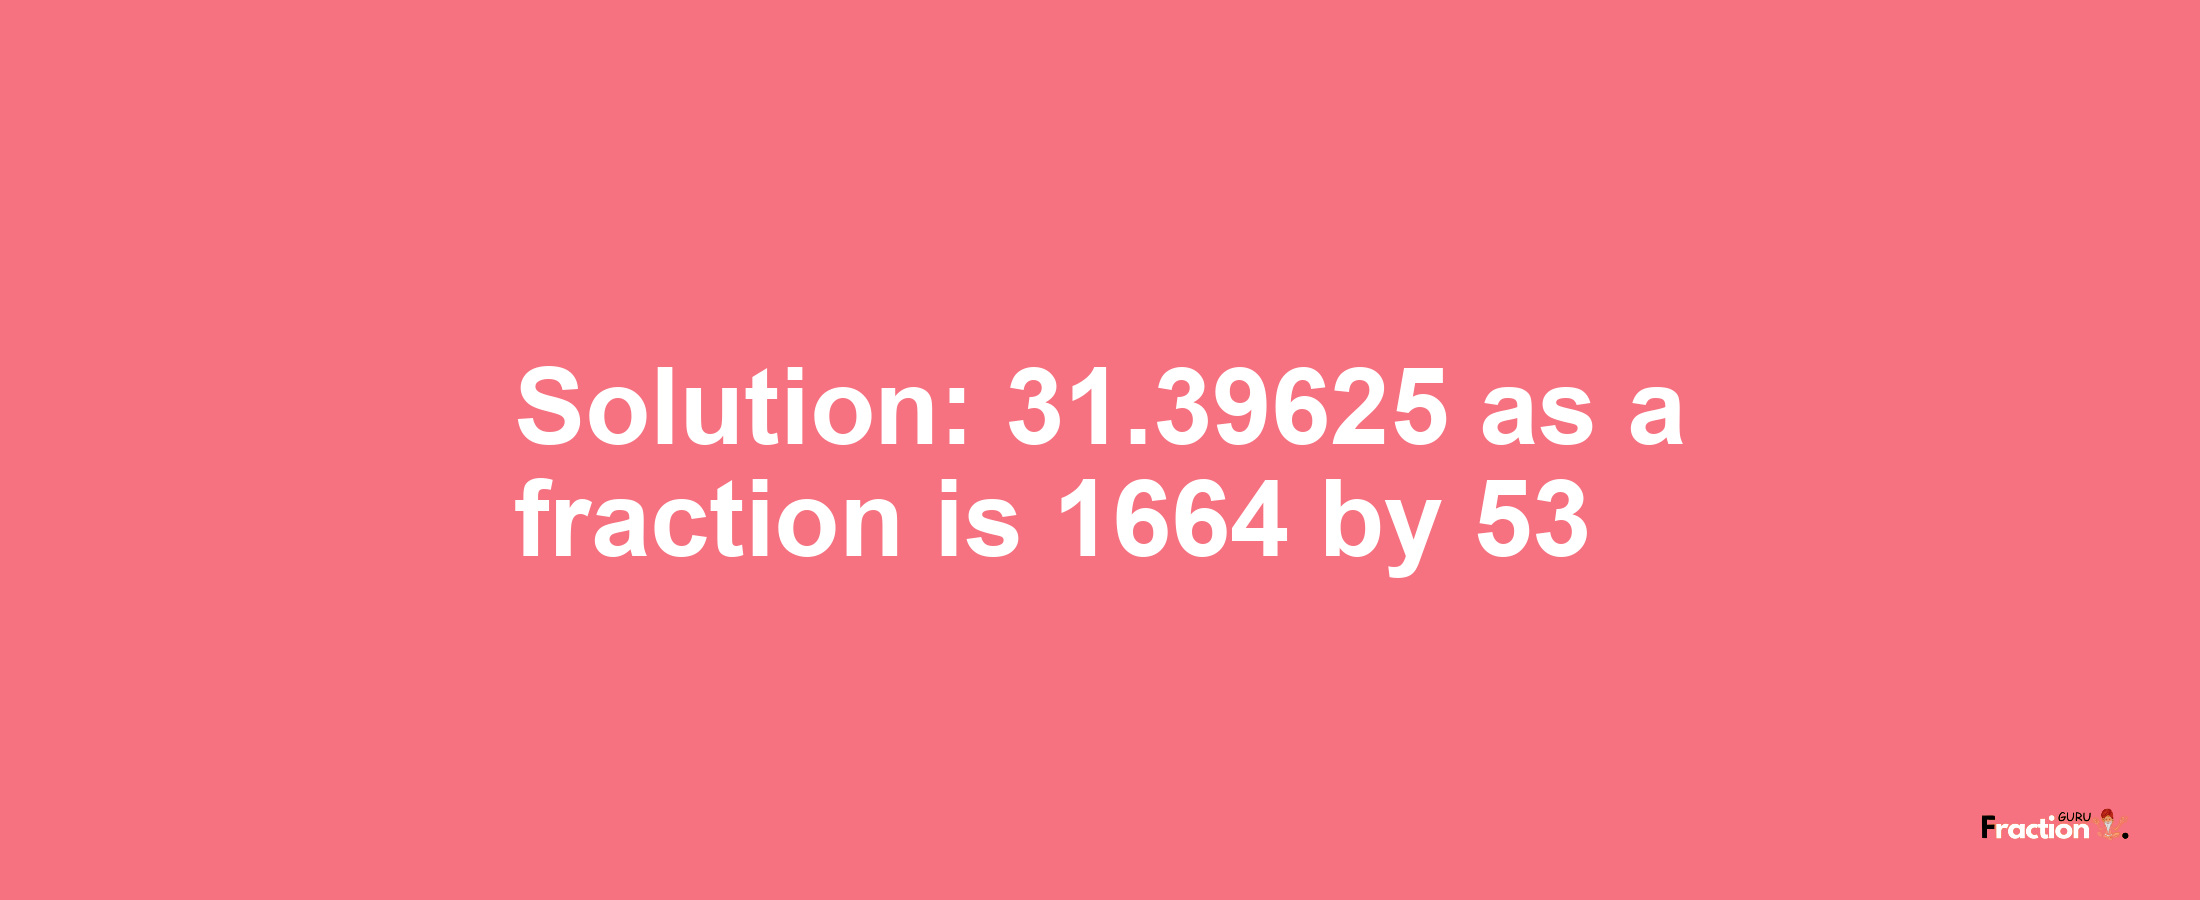 Solution:31.39625 as a fraction is 1664/53